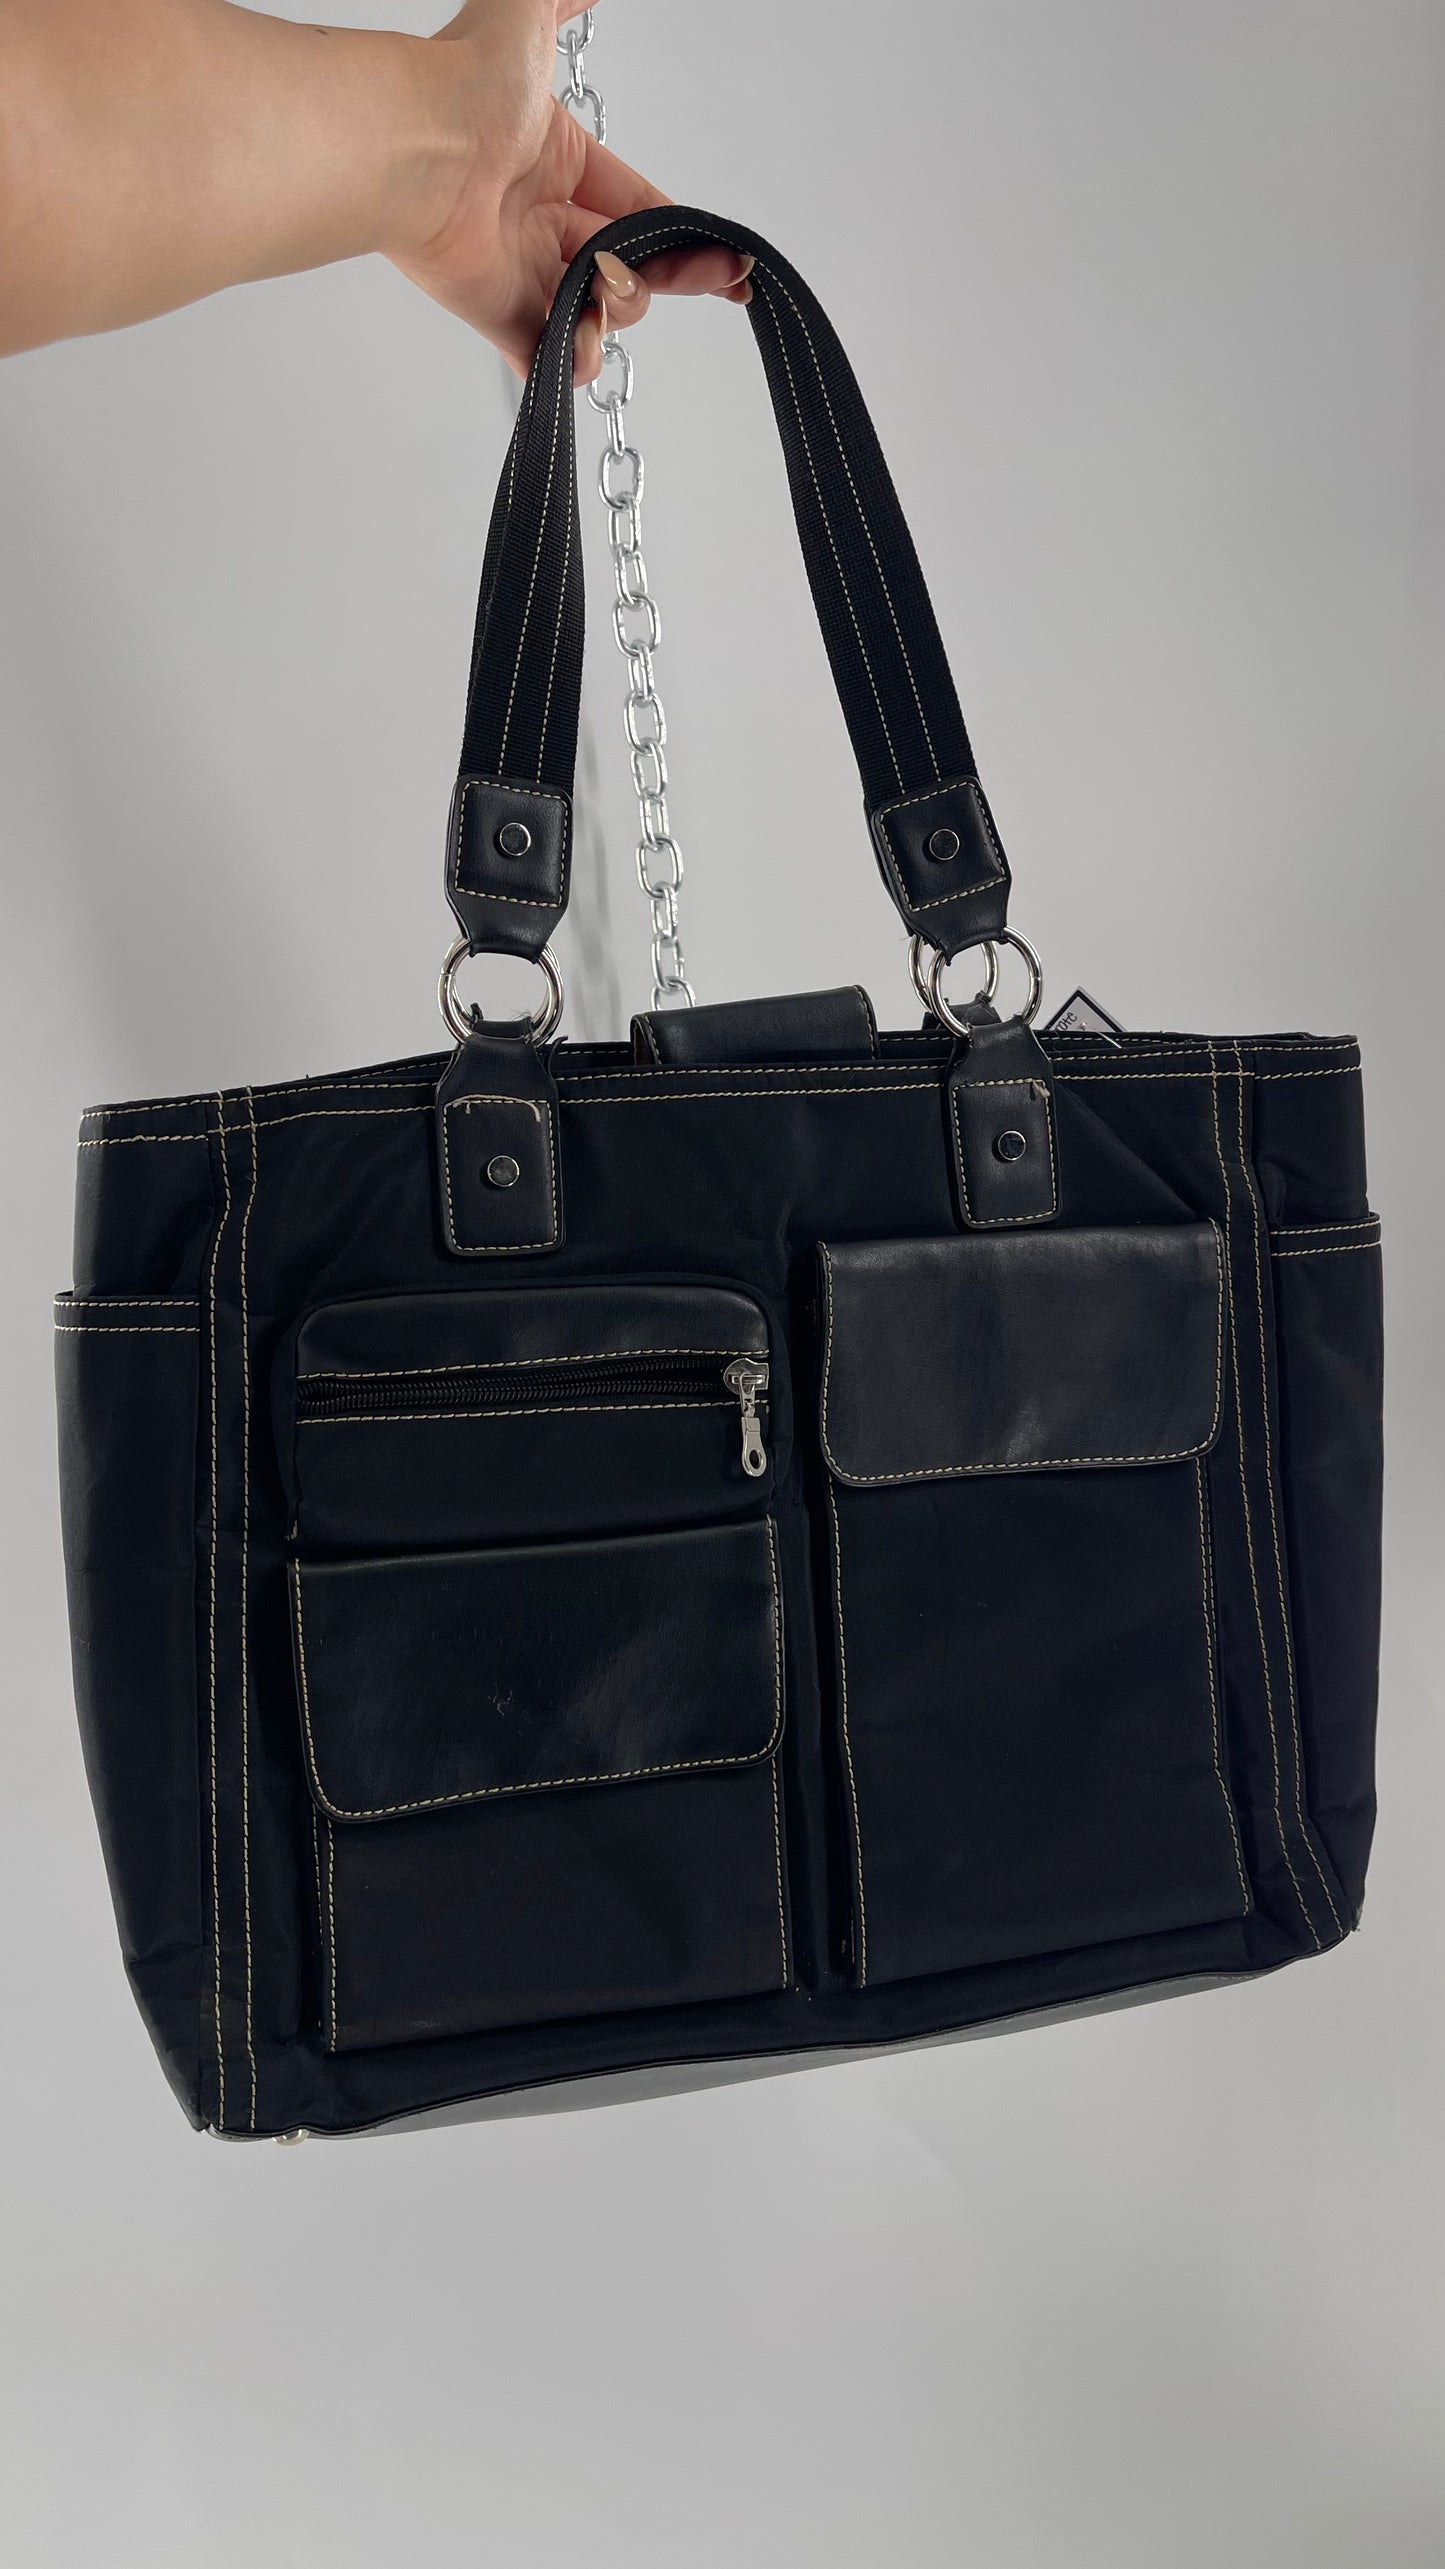 Vintage Oversized Black Exaggerated Pocket Tote Bag with Contrast Stitching